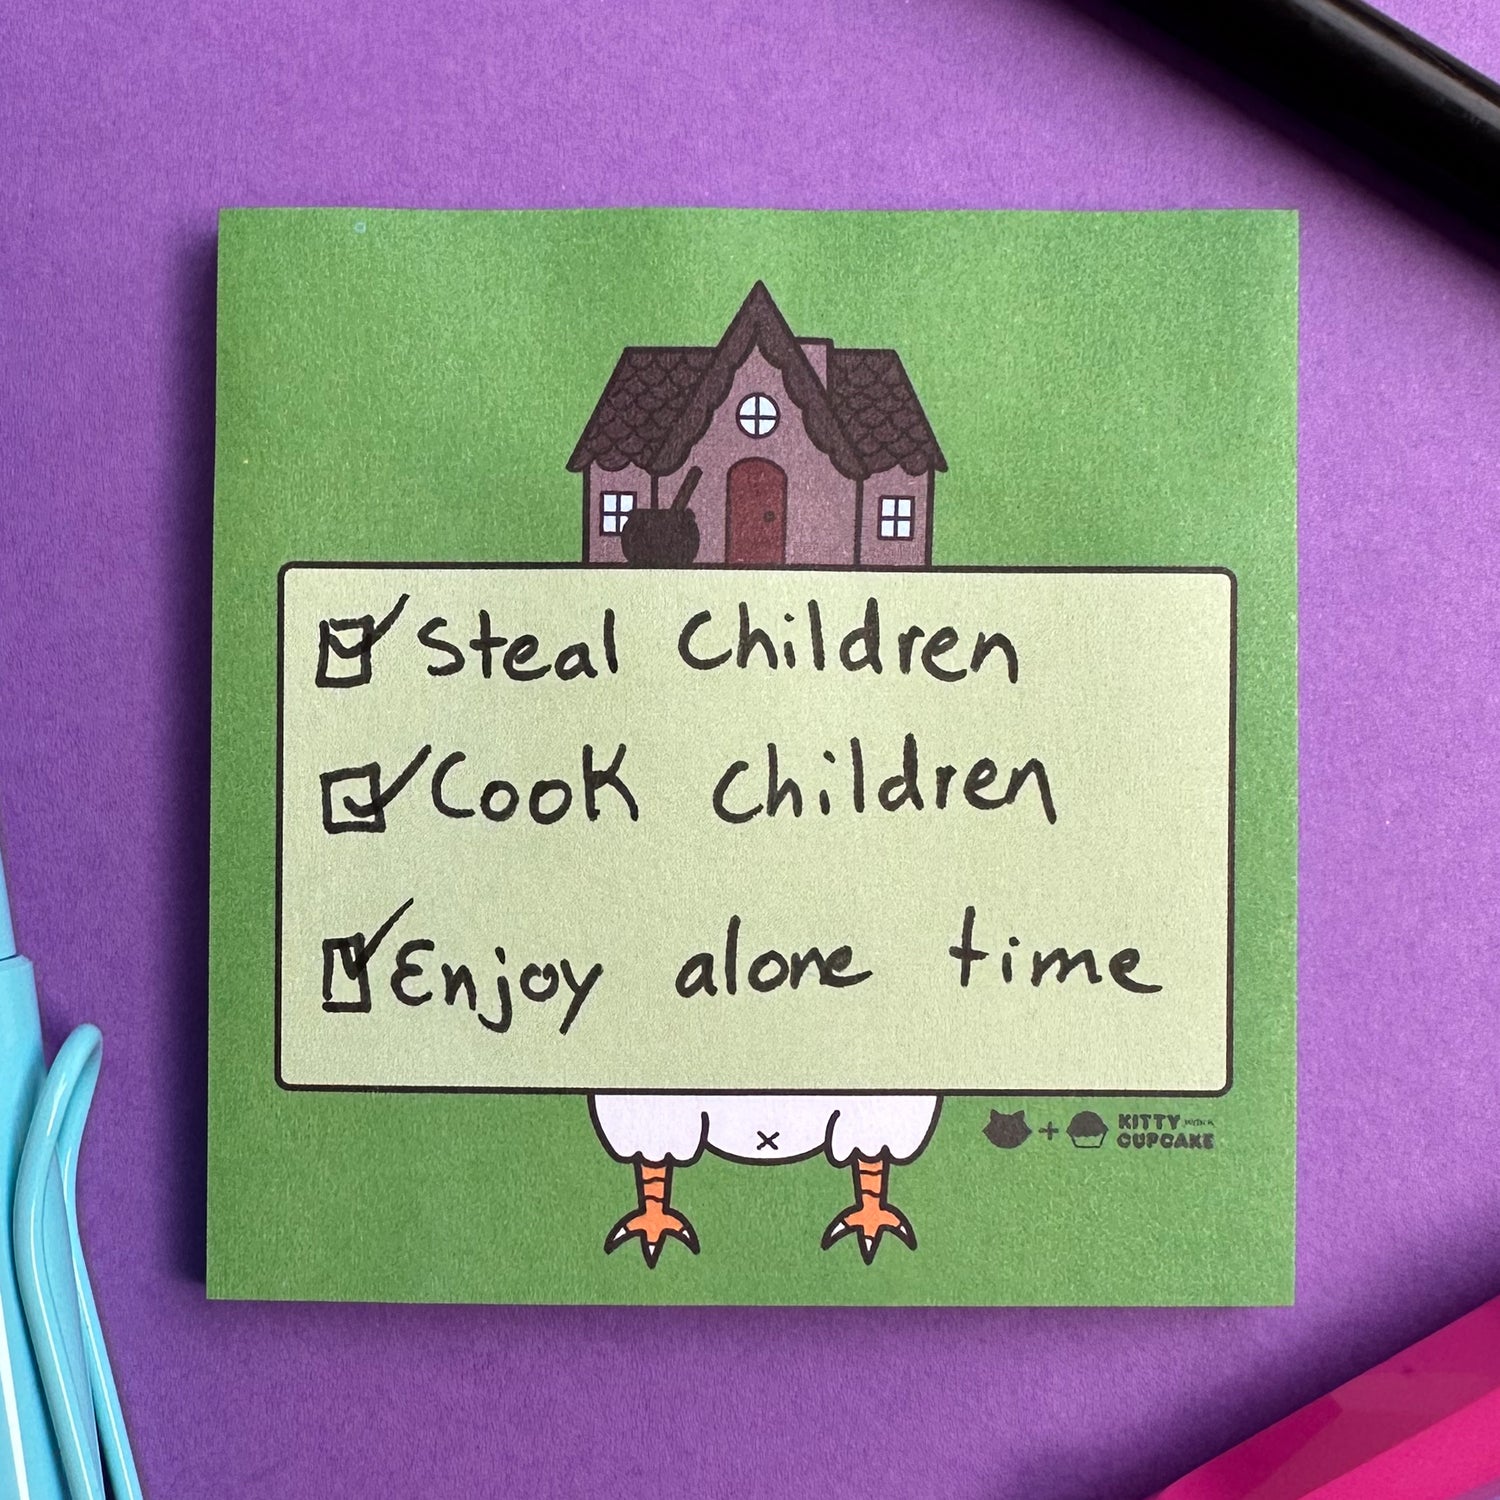 A square pad of green sticky notes featuring an illustration of Baba Yaga's house on a purple background with pens surrounding the pad. There is a to-do list written on the pad that reads "Steal Children, Cook Children, Enjoy alone time" all of these items are checked off. 